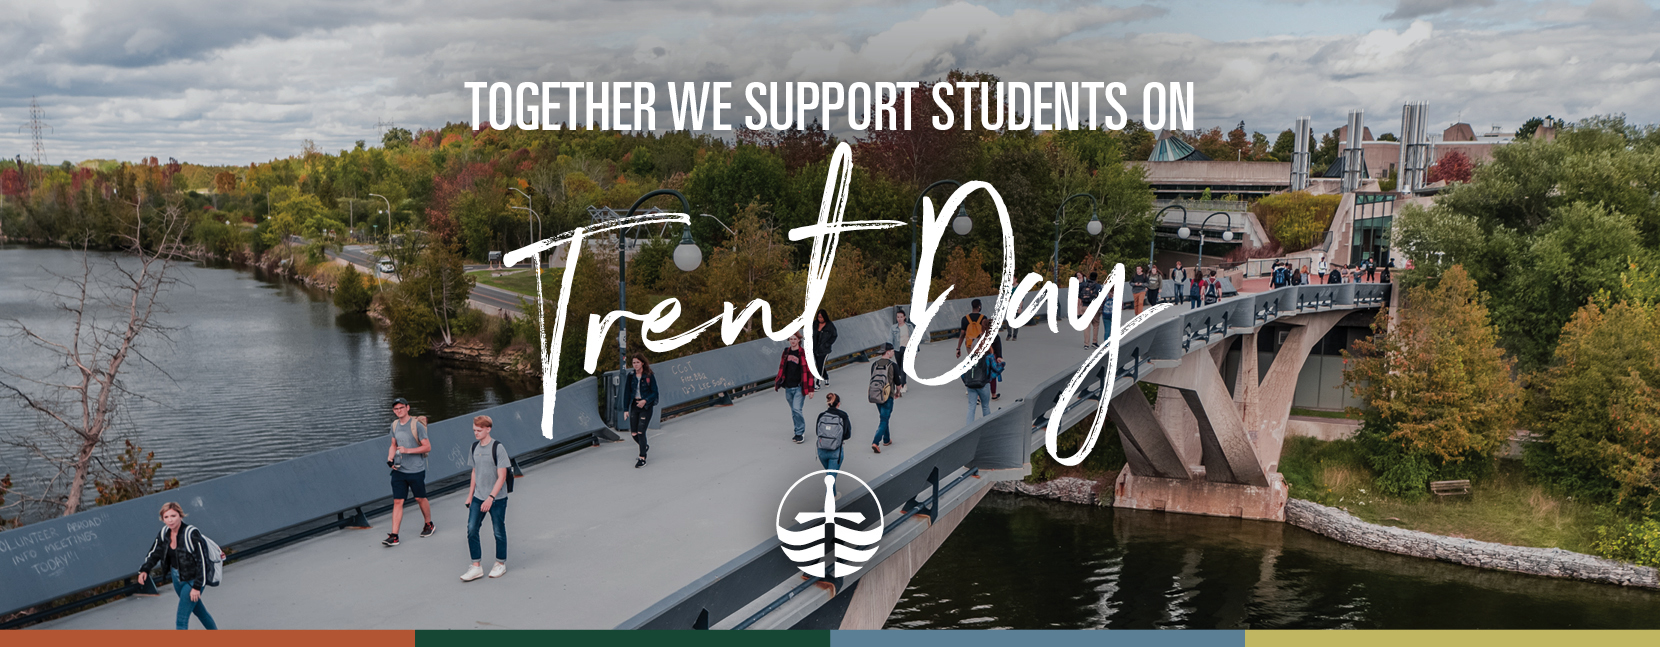 Together we support students on Trent Day